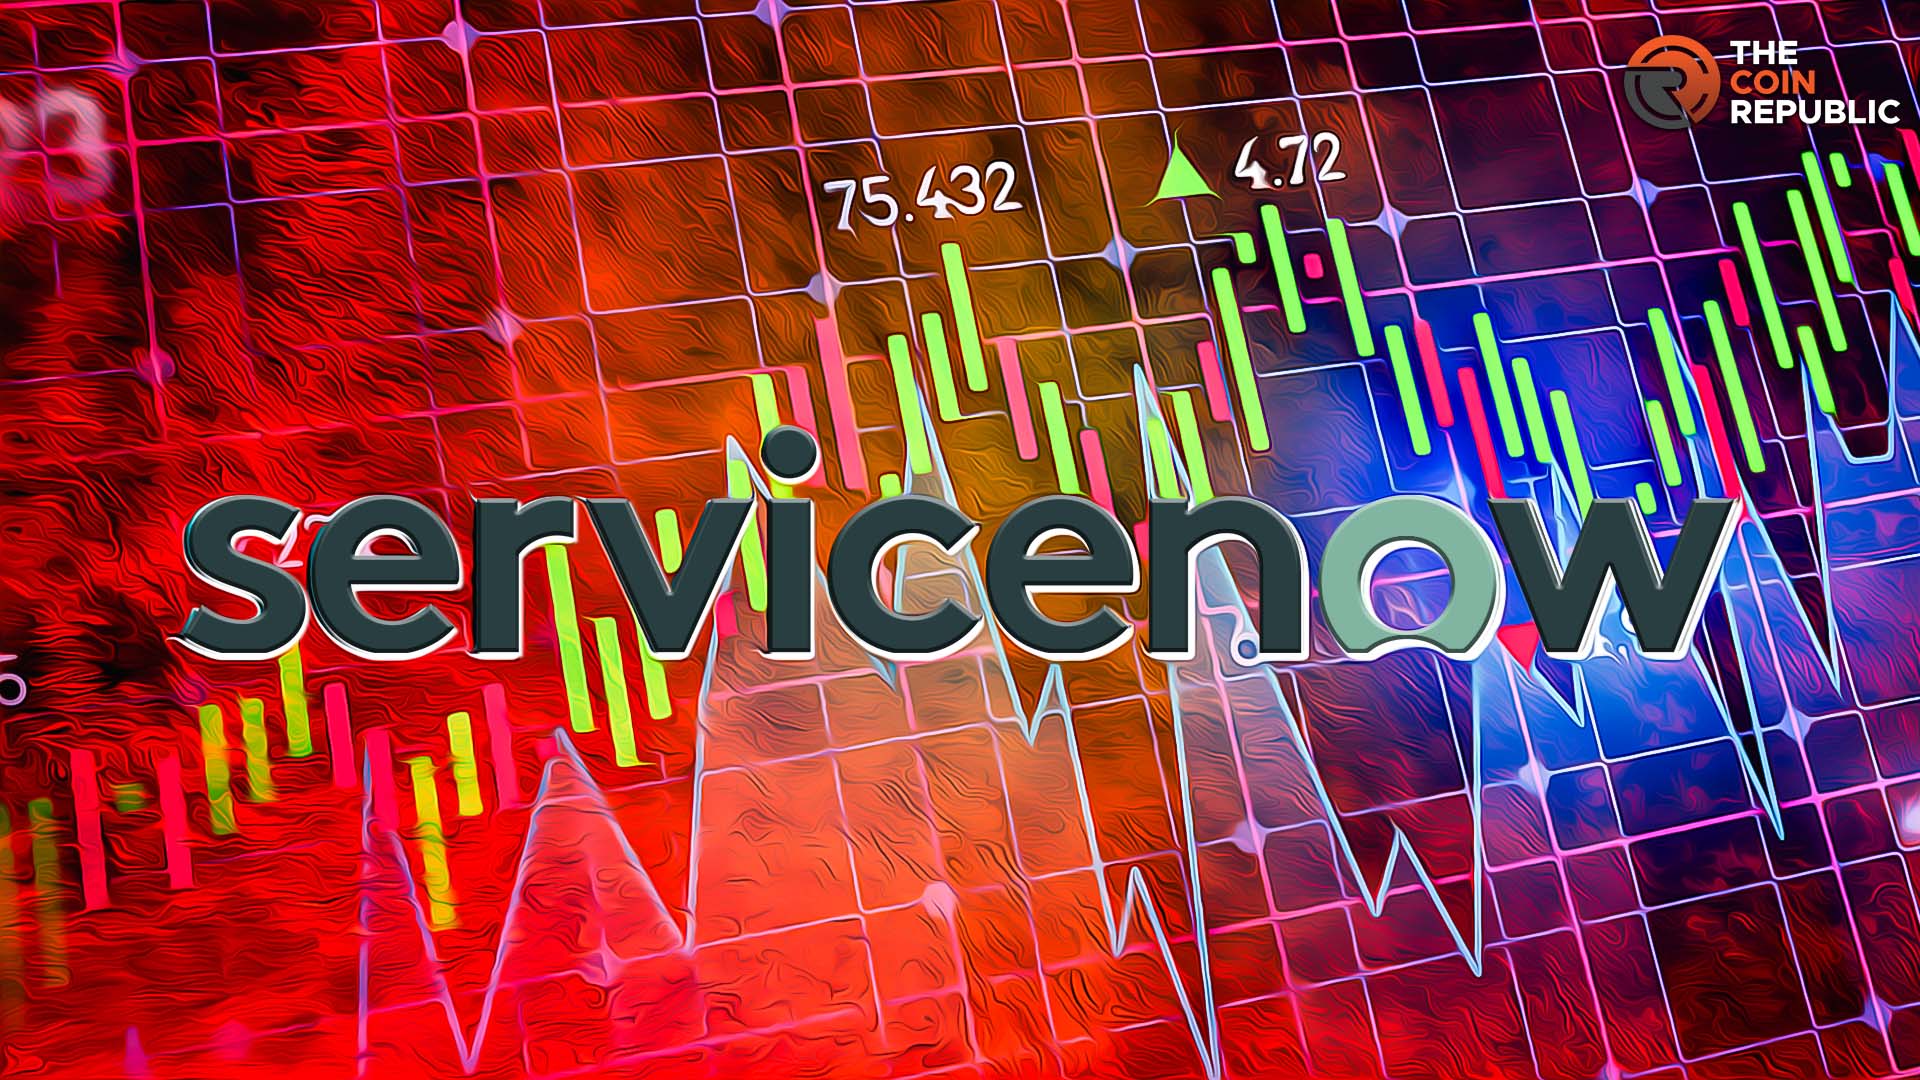 ServiceNow INC (NOW Stock): Rallying Hard on AI/ML Innovations  